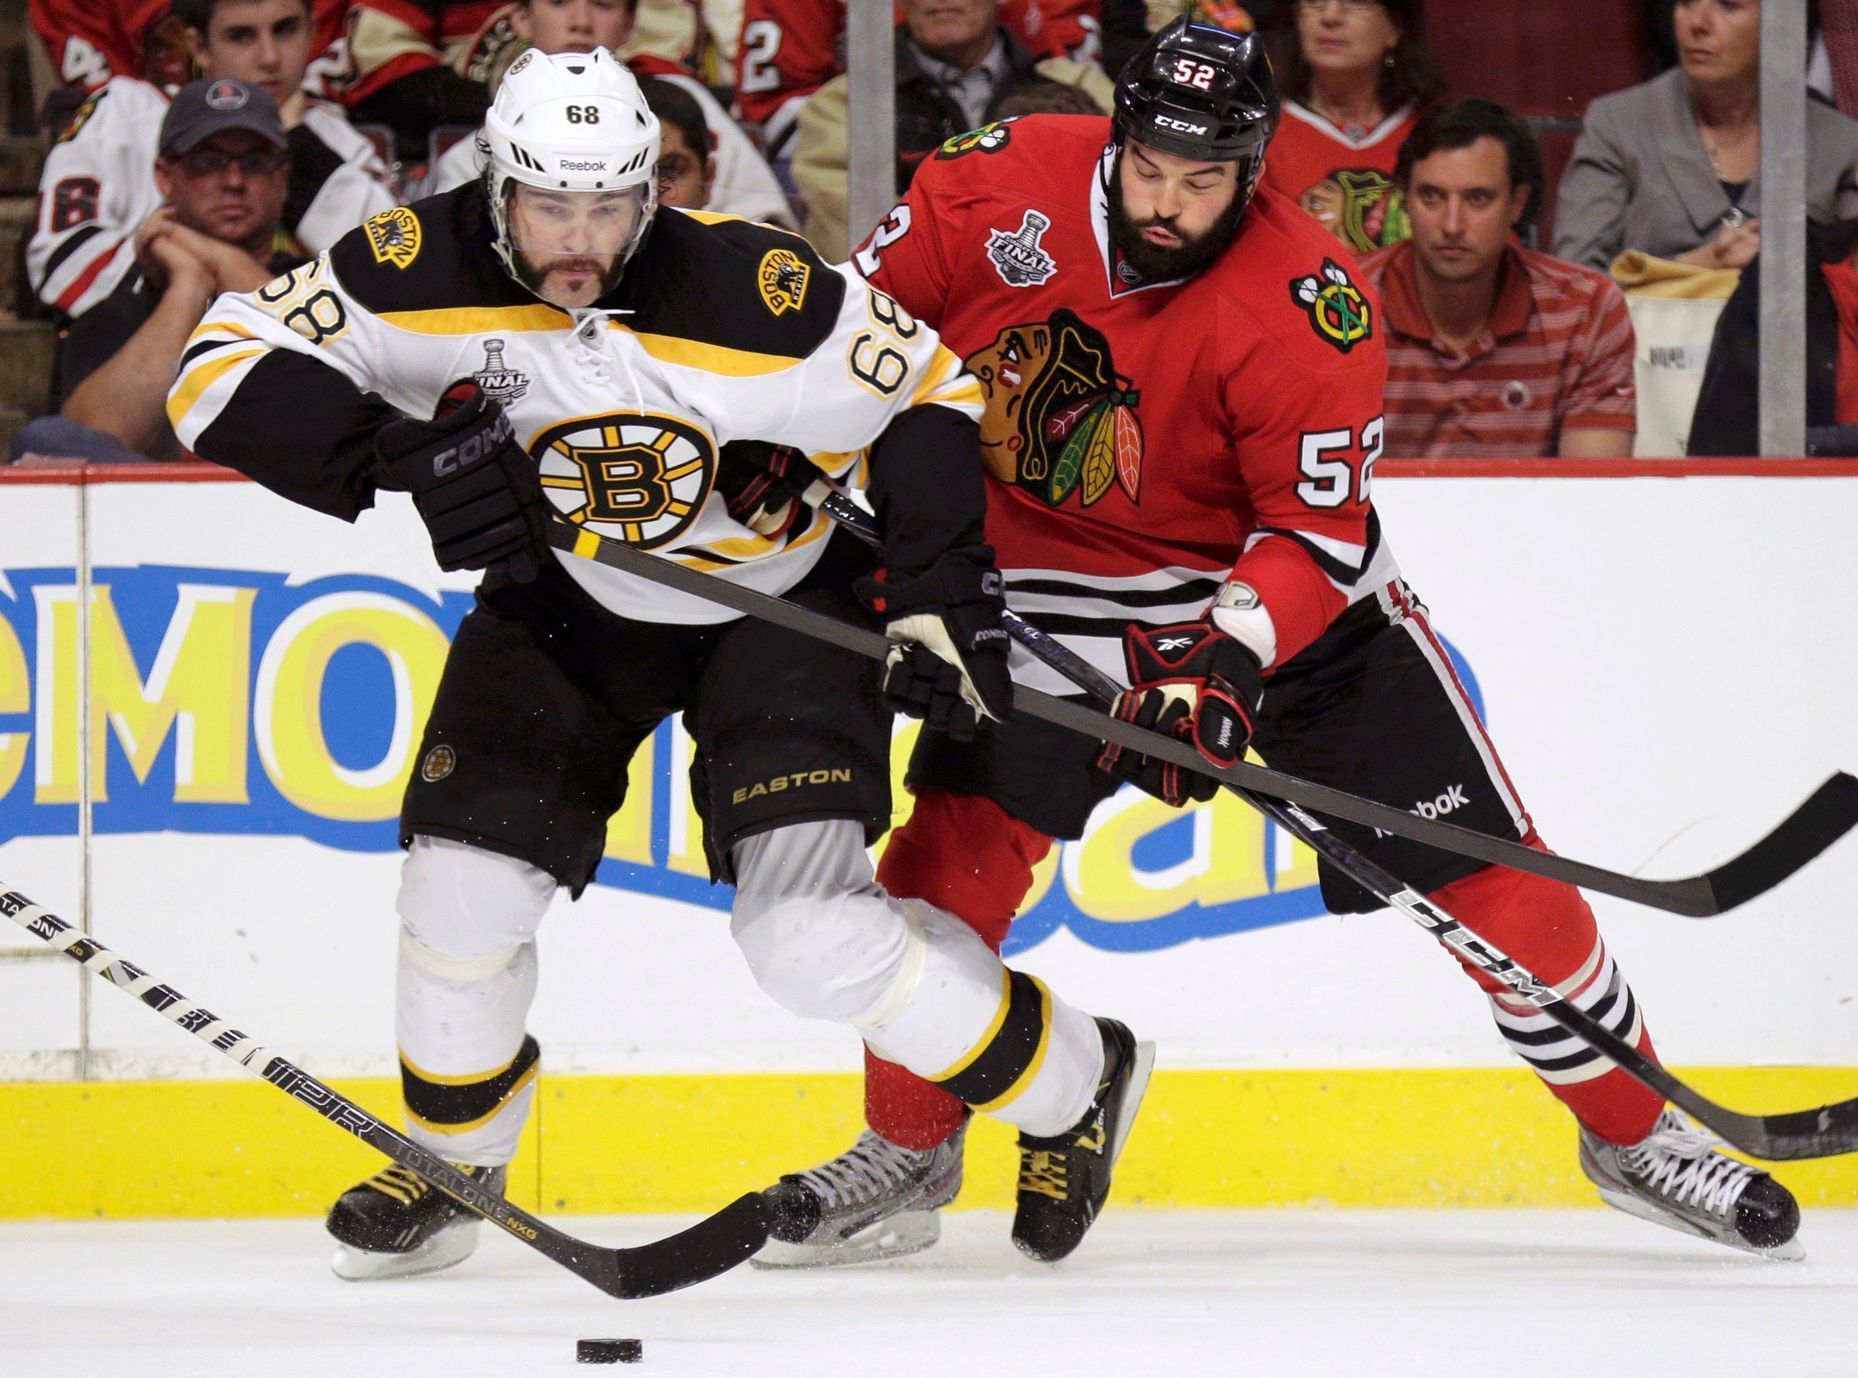 Bruins' Jagr is checked by Blackhawks' Bollig in double-over